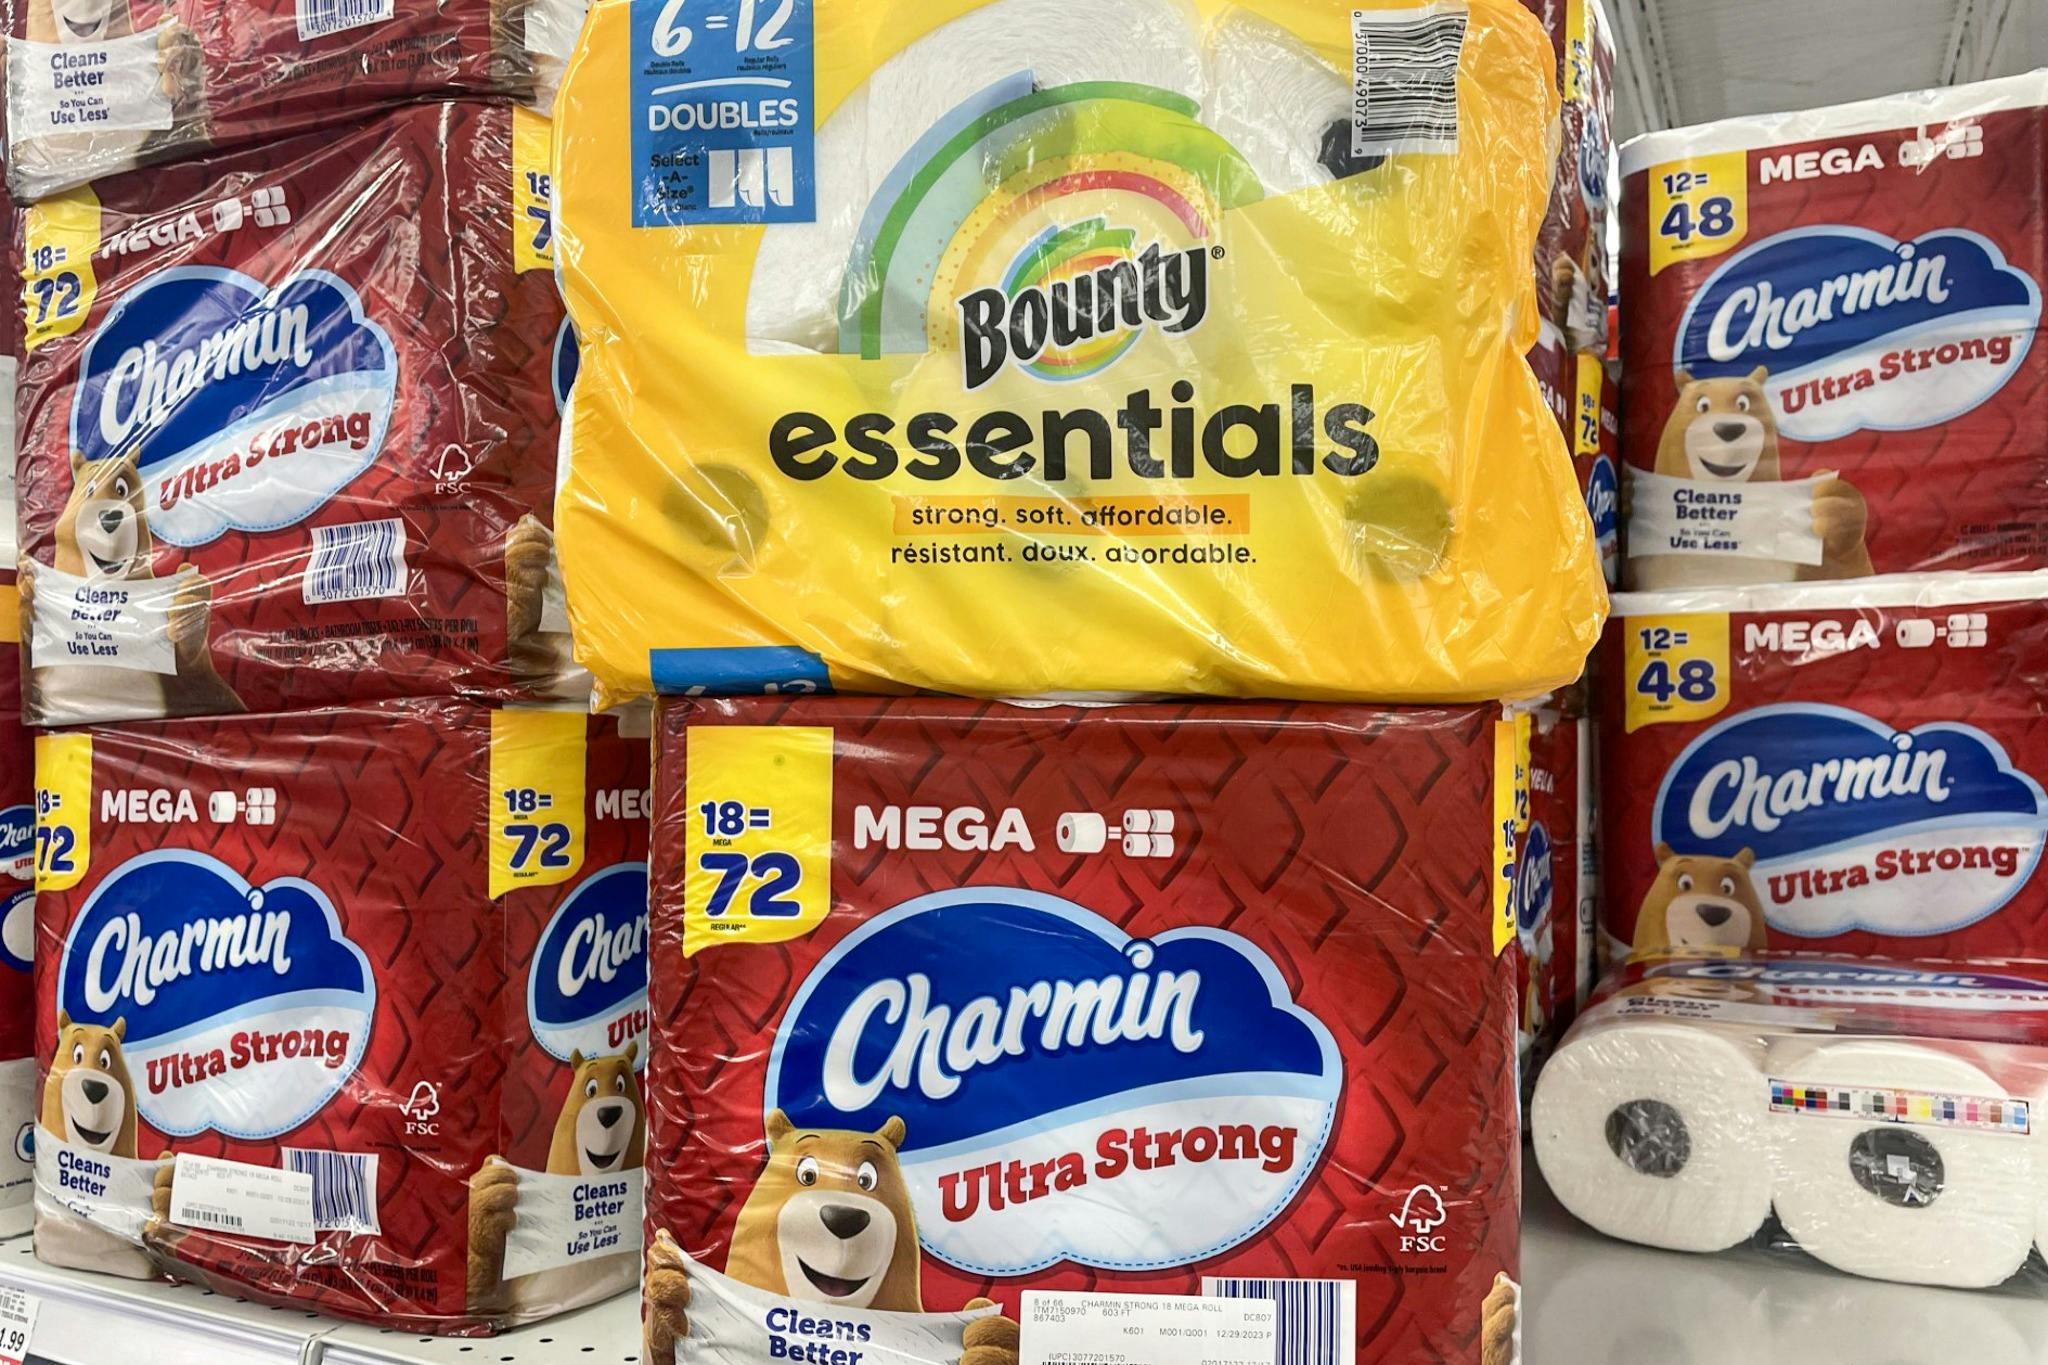 6 HOUSEHOLD ITEMS FOR LESS THAN $5 Eligible items MANUFACTURER Ở 11/18